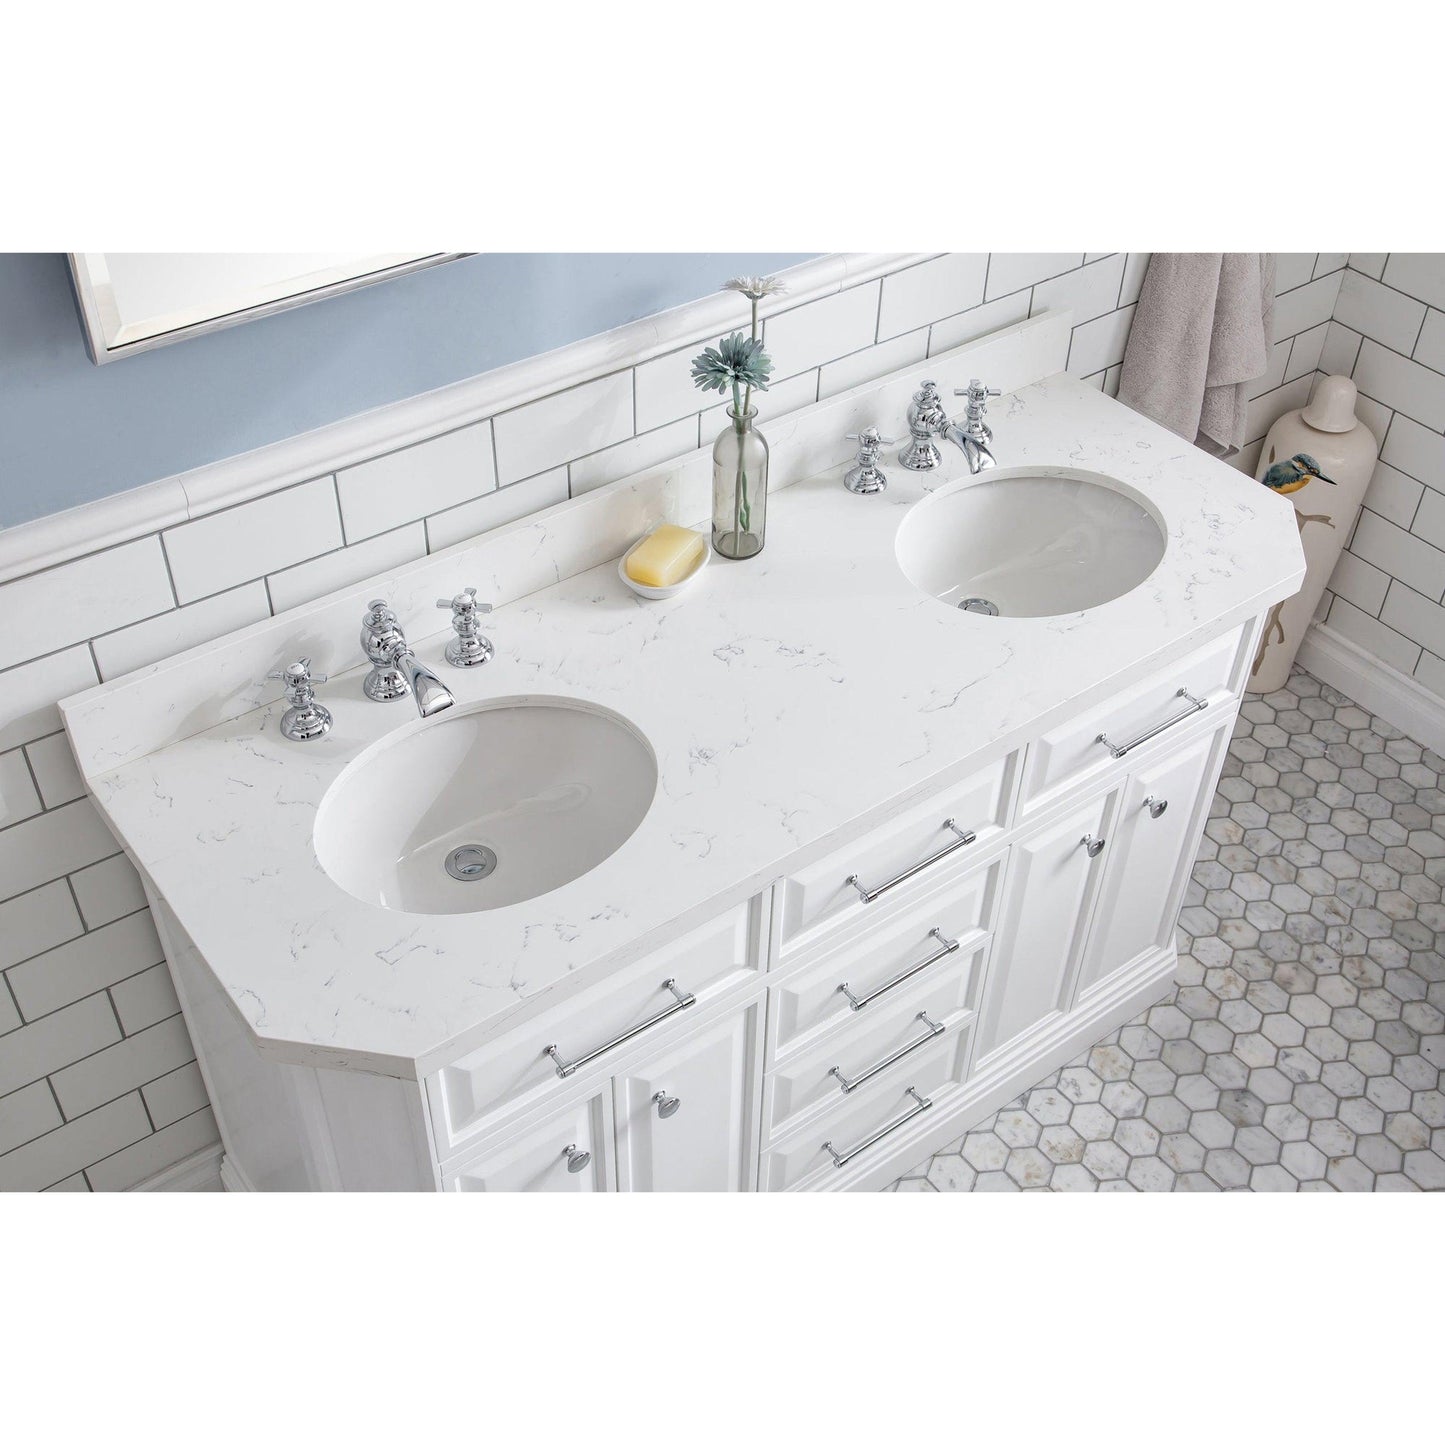 Water Creation Palace 60" Quartz Carrara Pure White Bathroom Vanity Set With Hardware And F2-0013 Faucets in Chrome Finish